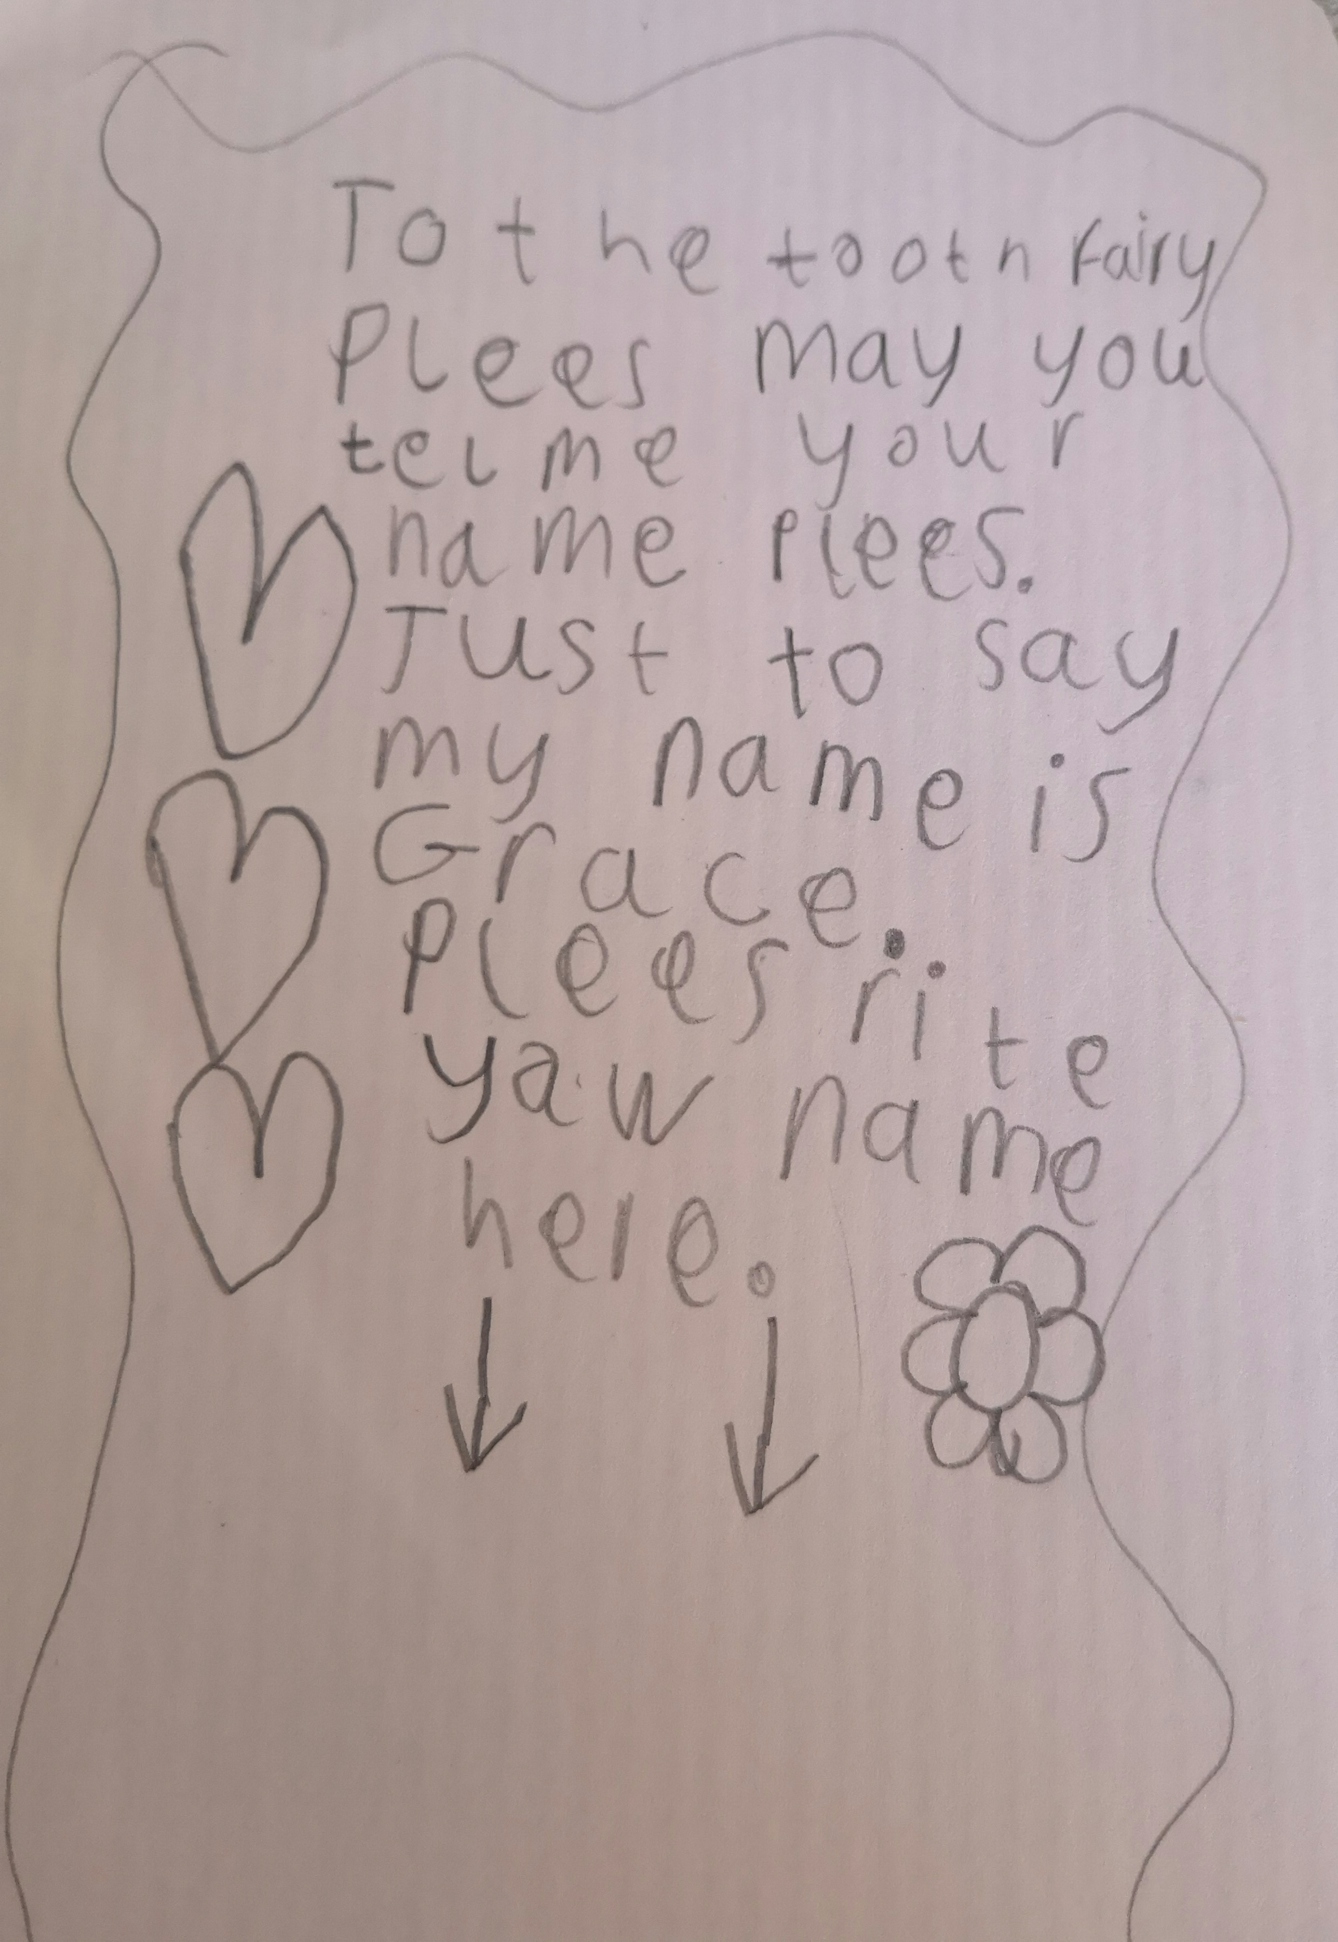 Letter written in pencil on pale pink paper. Reads: To the Tooth Fairy. Please may you tell me your name please. Just to say my name is Grace. Please write your name here.